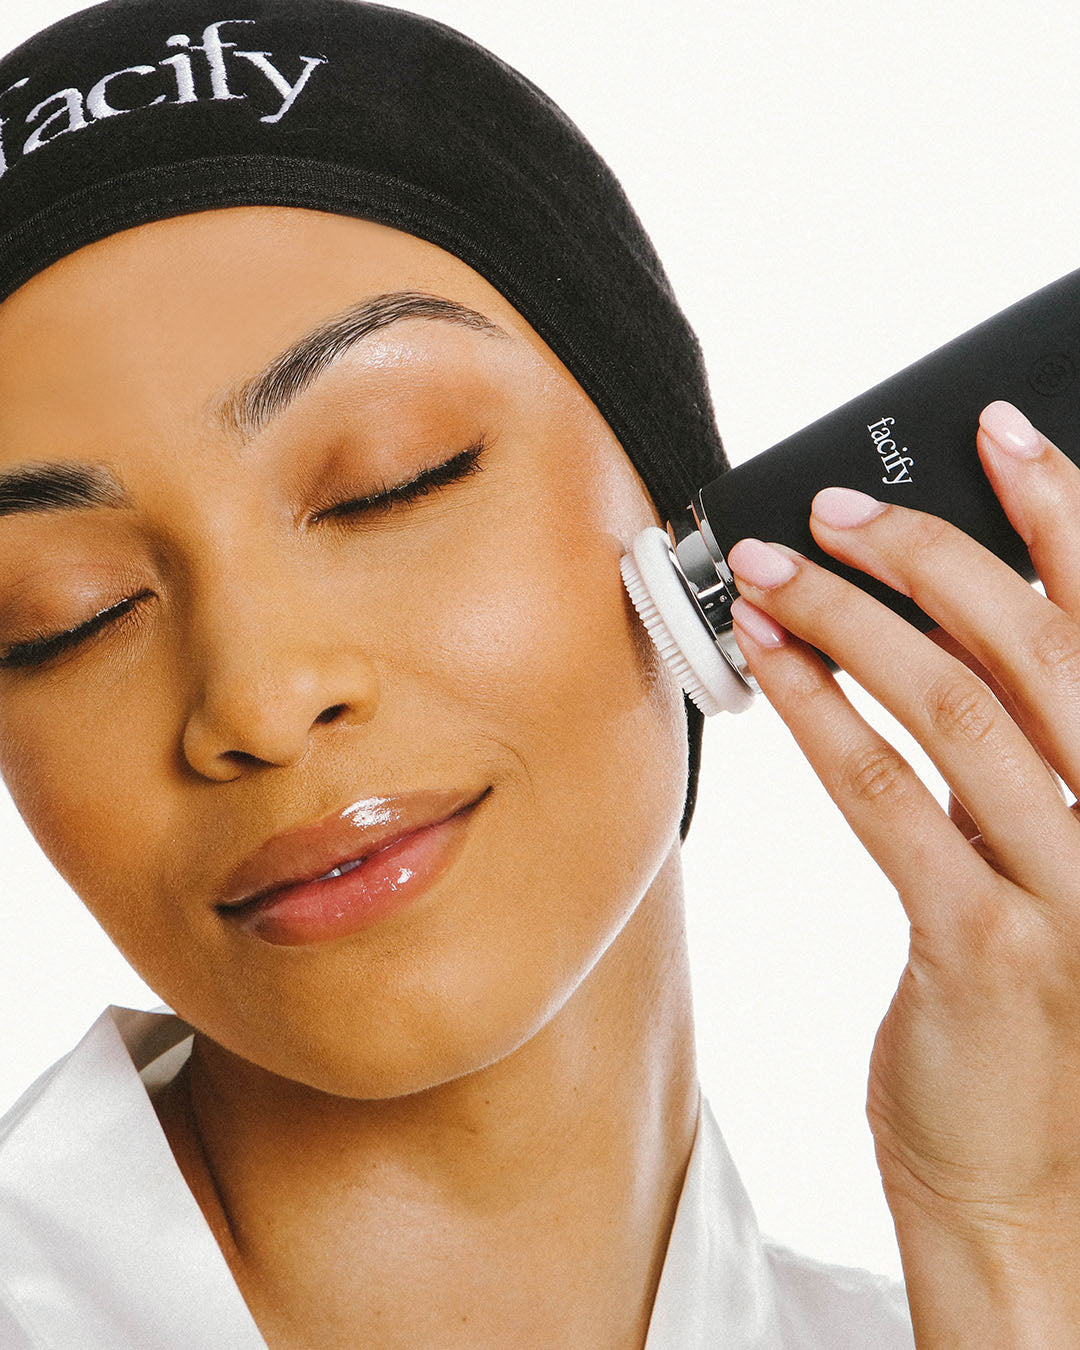 woman in spa robe and headband using the large cleansing head attachment facify beauty wand device on her face